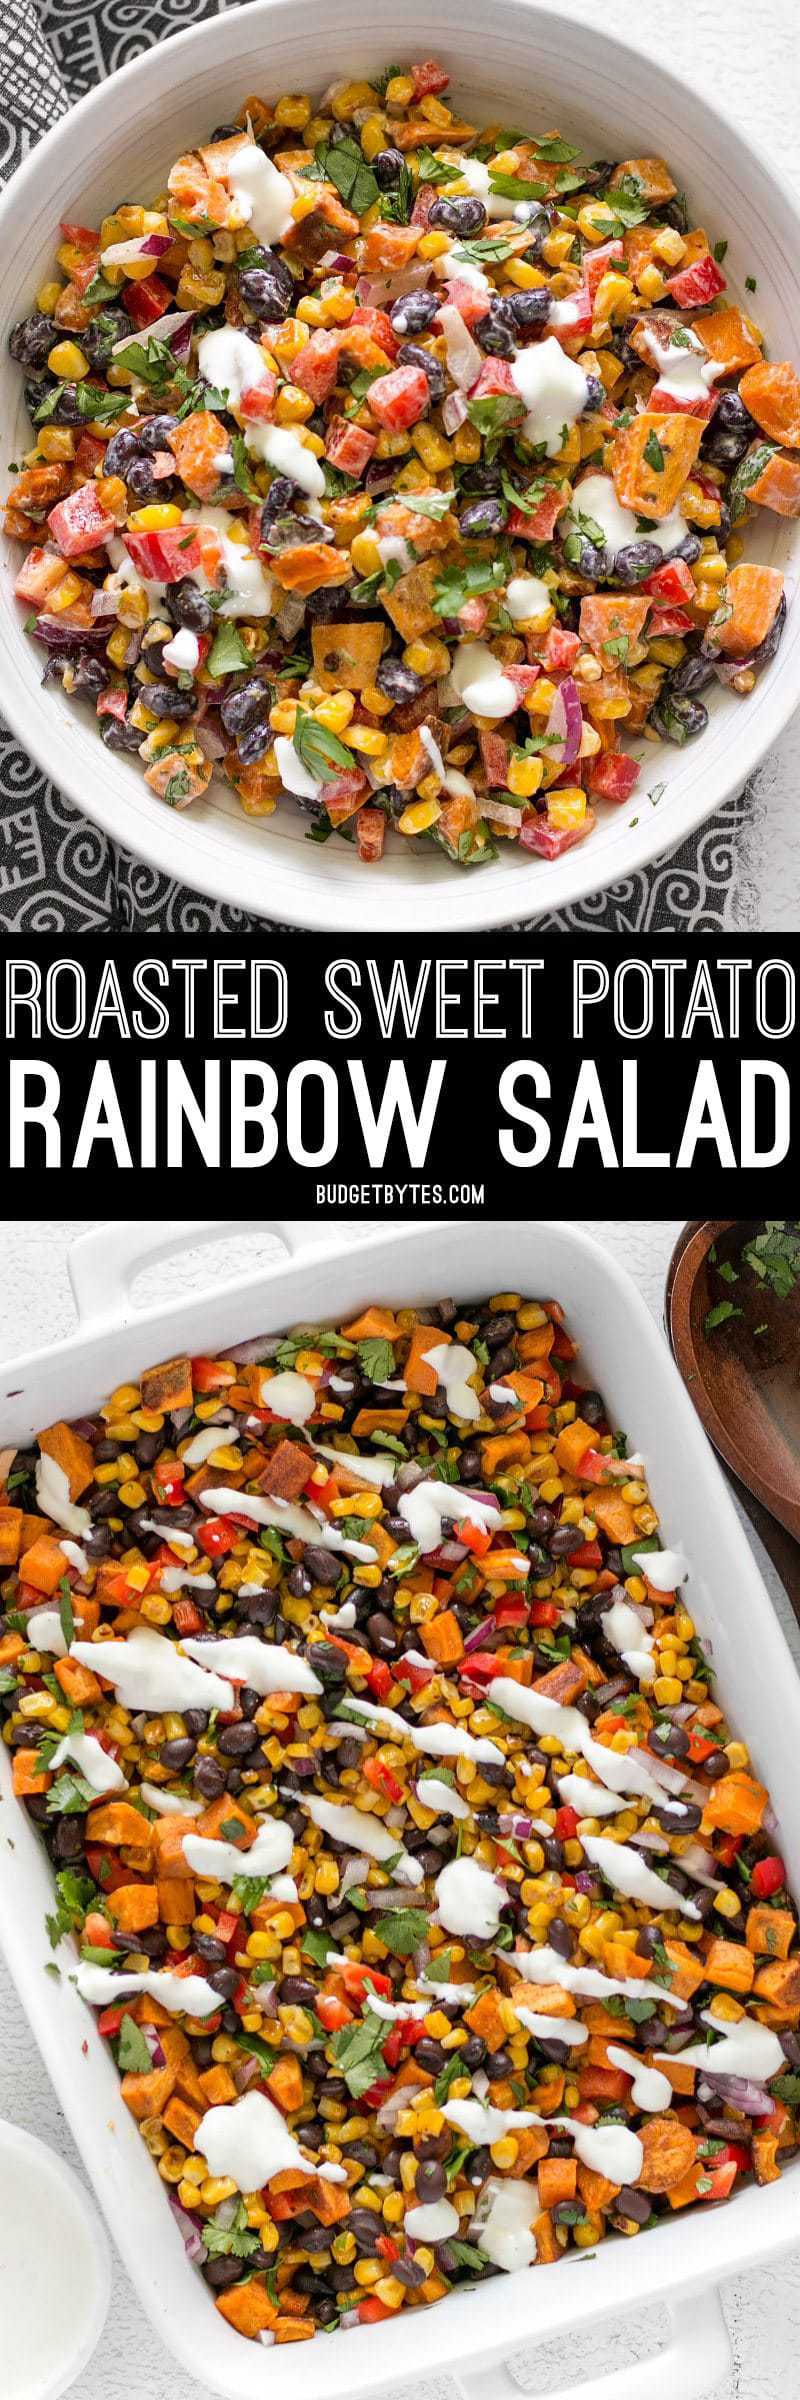 This Roasted Sweet Potato Rainbow Salad combines a medley of vibrant colors and flavors, brought together by a bright and creamy dressing. BudgetBytes.com